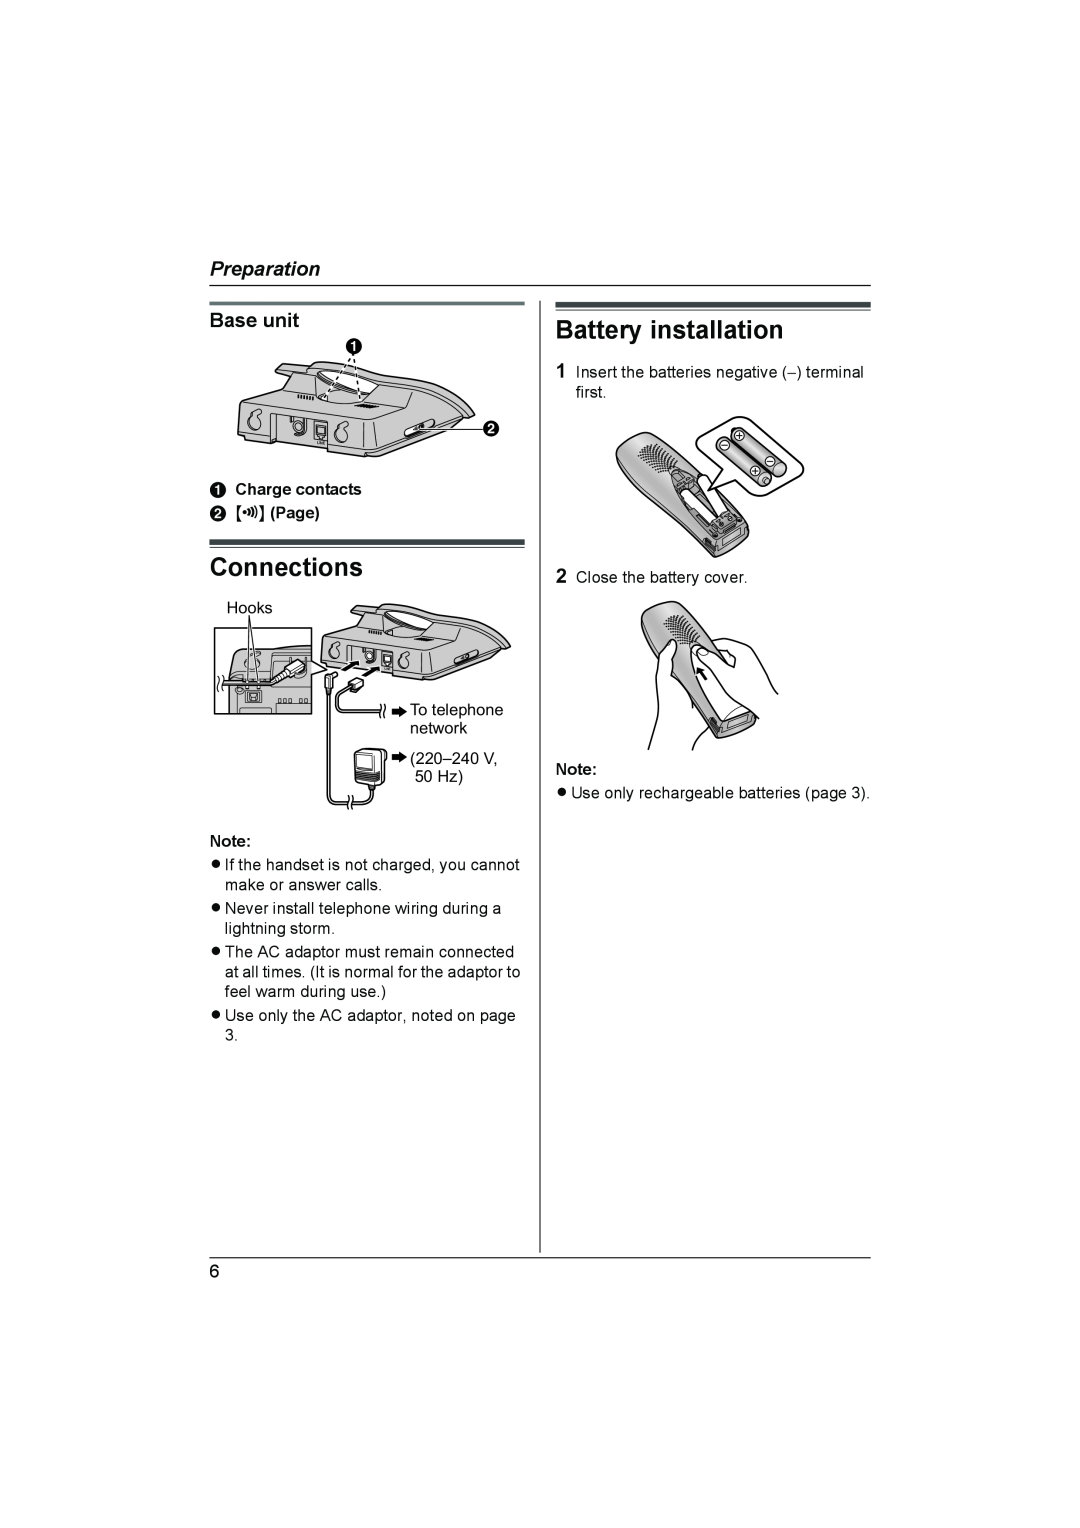 Panasonic KX-TCD440NZ Connections, Battery installation, Base unit, A Charge contacts B x Page, Preparation 